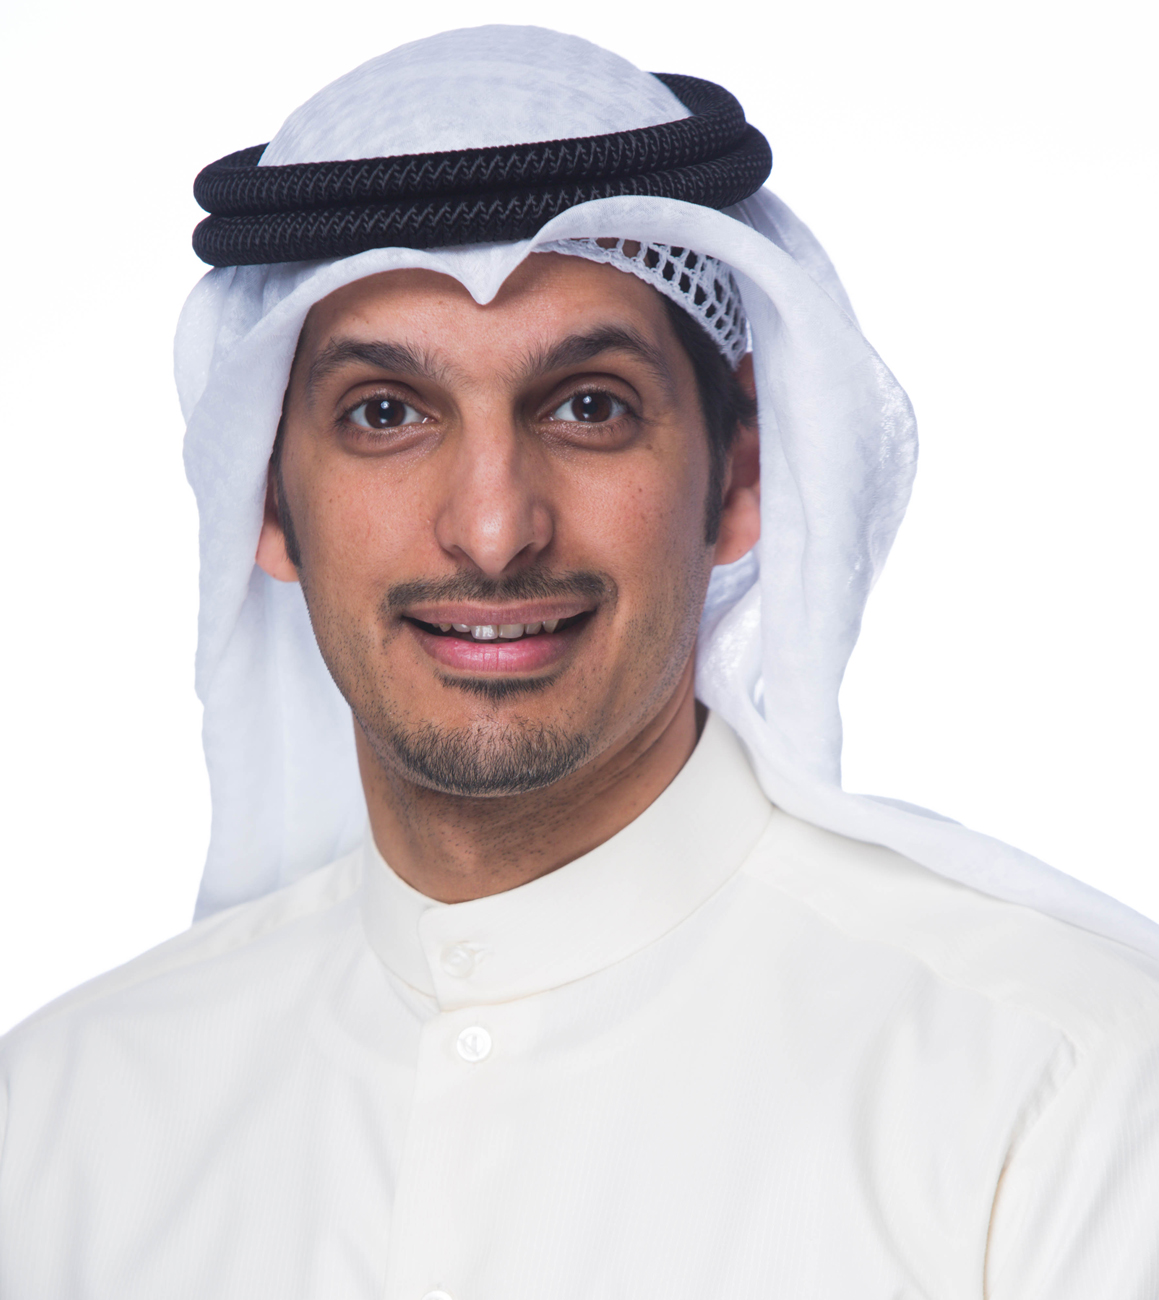 Assistant undersecretary for youth development at The Ministry of State for Youth Affairs Abdulrahman Al-Mutairi